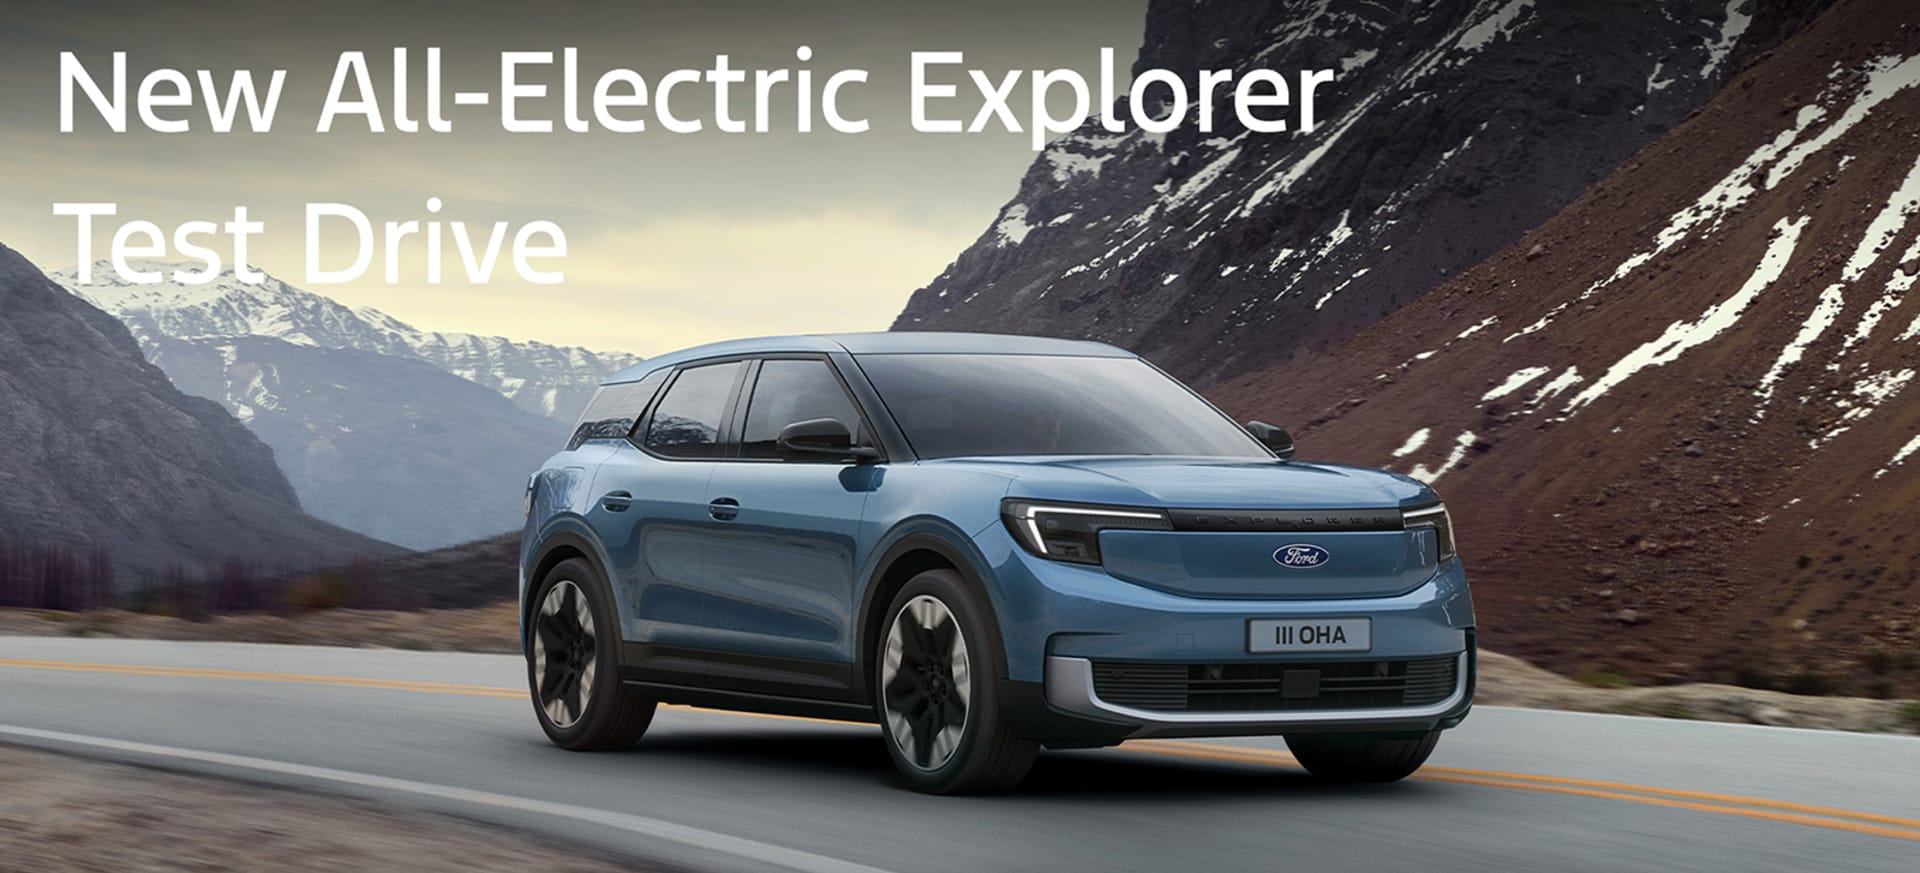 The New All-Electric Explorer Banner